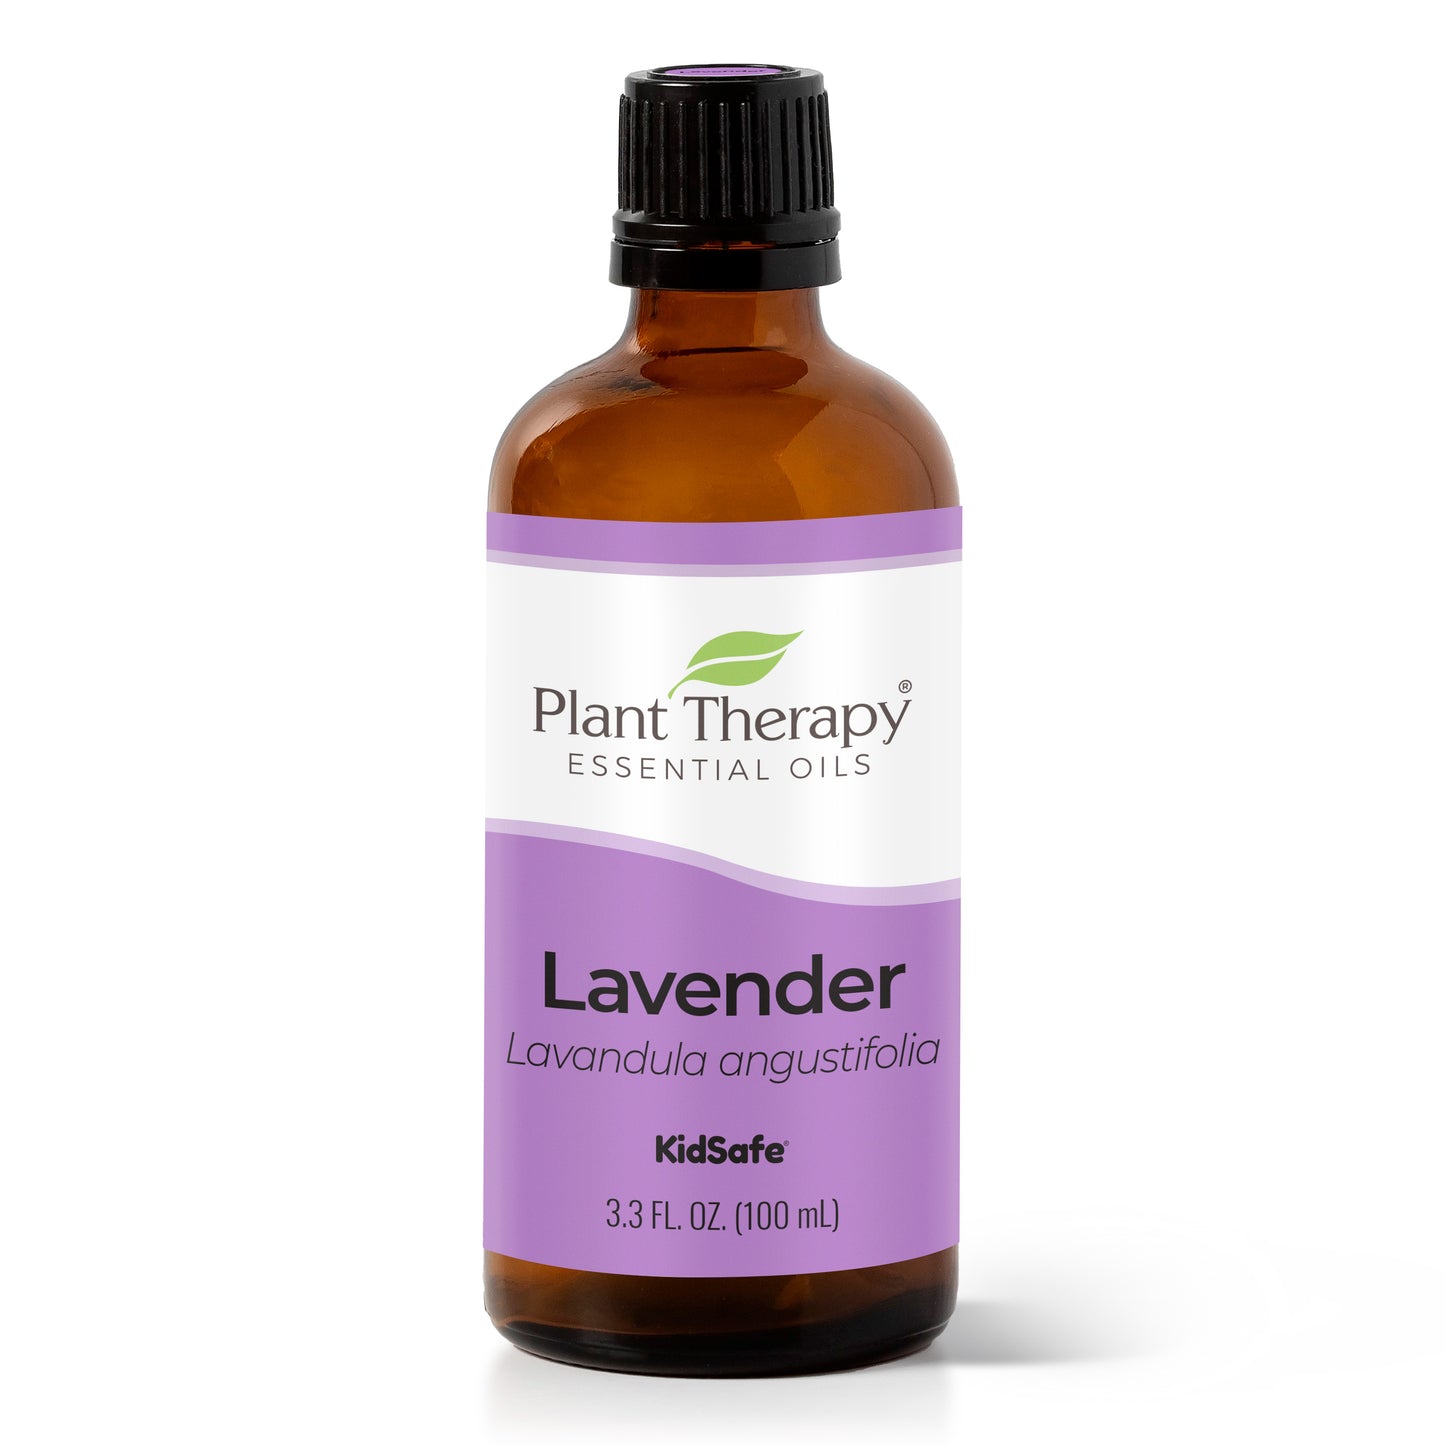 Plant Therapy lavender essential oil